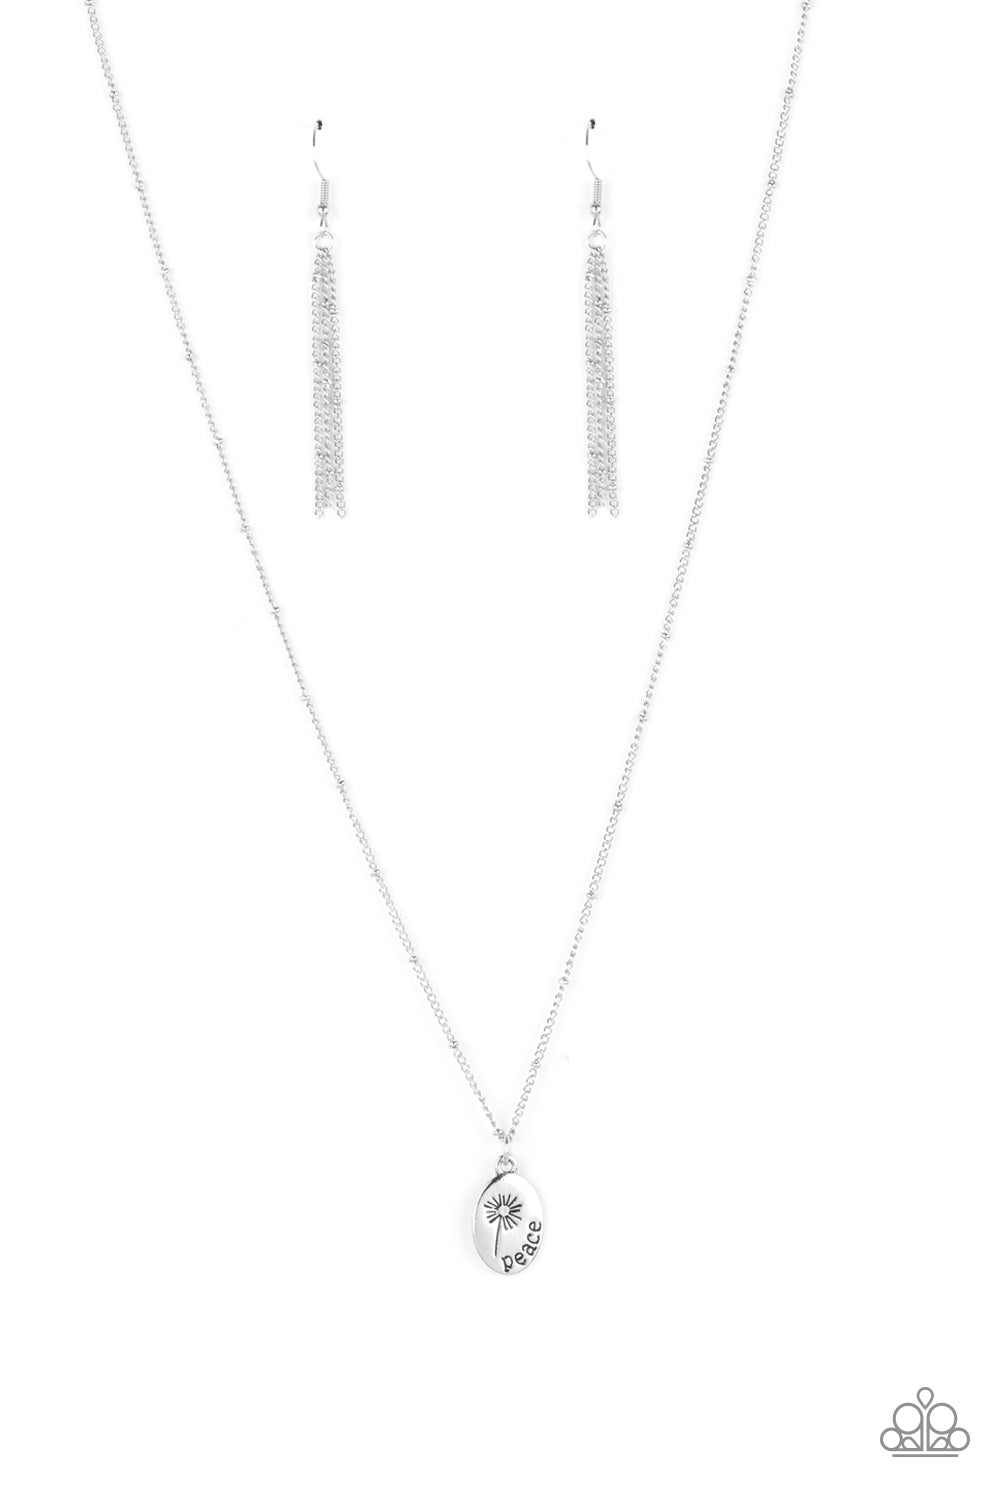 Be The Peace You Seek Silver Necklace - Paparazzi Accessories  Featuring a blooming dandelion, a simple silver disc is stamped in the word, "Peace," creating a whimsical pendant below the collar. Features an adjustable clasp closure.  All Paparazzi Accessories are lead free and nickel free!  Sold as one individual necklace. Includes one pair of matching earrings.